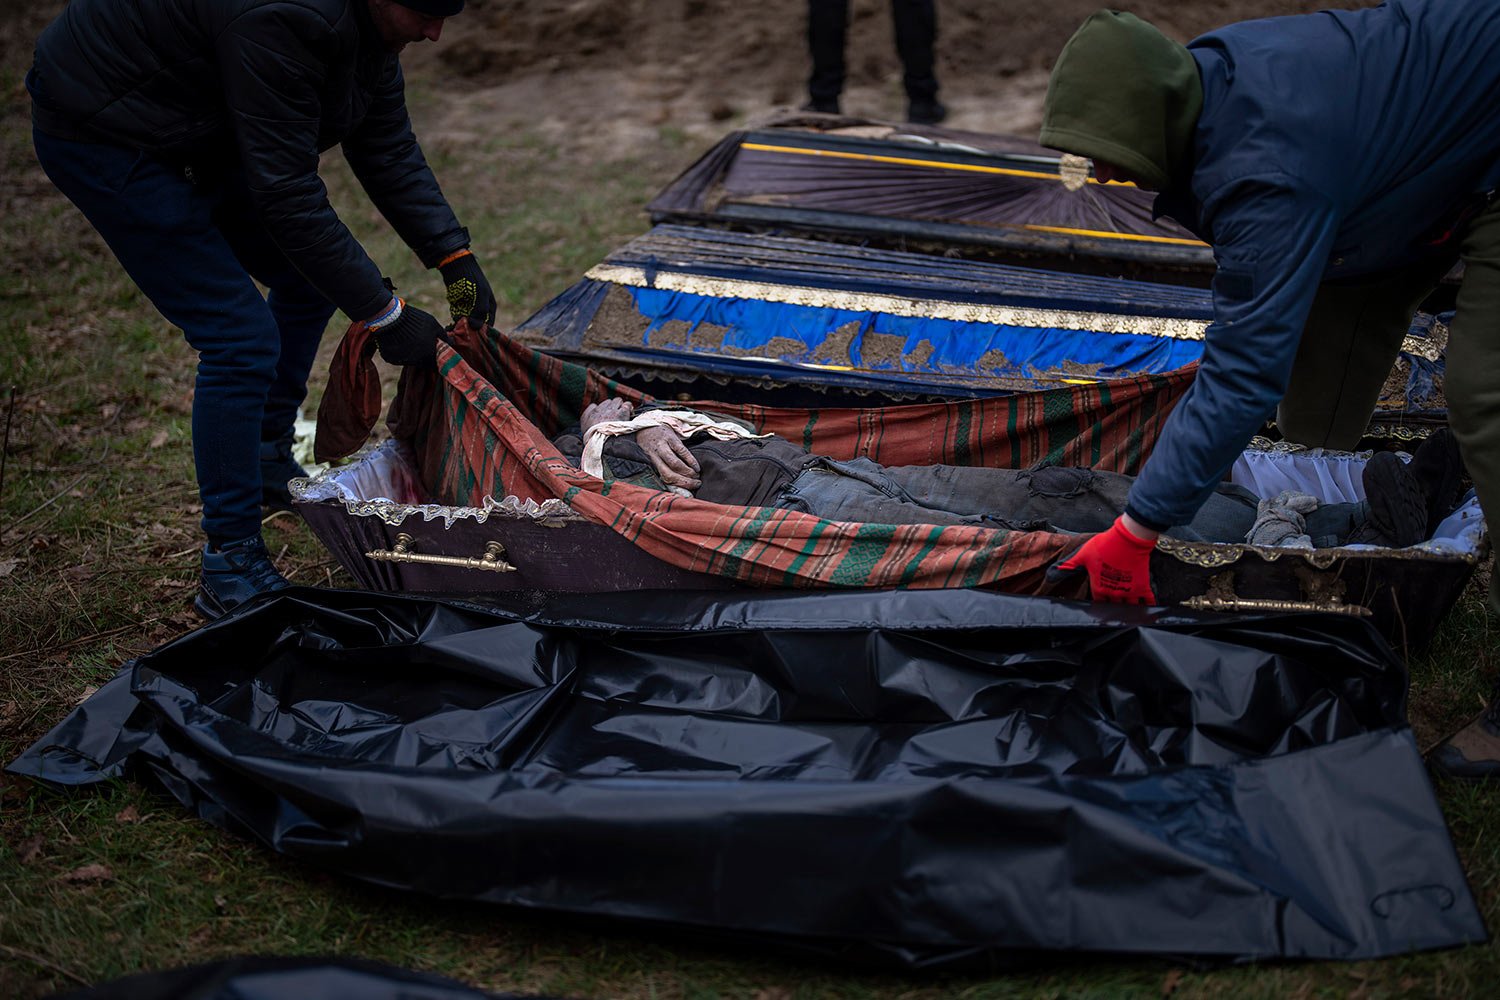  Volunteers put in a bag the body of a civilian killed by Russian army, after been removed from a mass grave, during an exhumation in Mykulychi, Ukraine on Sunday, April 17, 2022. All four bodies in the village grave were killed on the same street, o